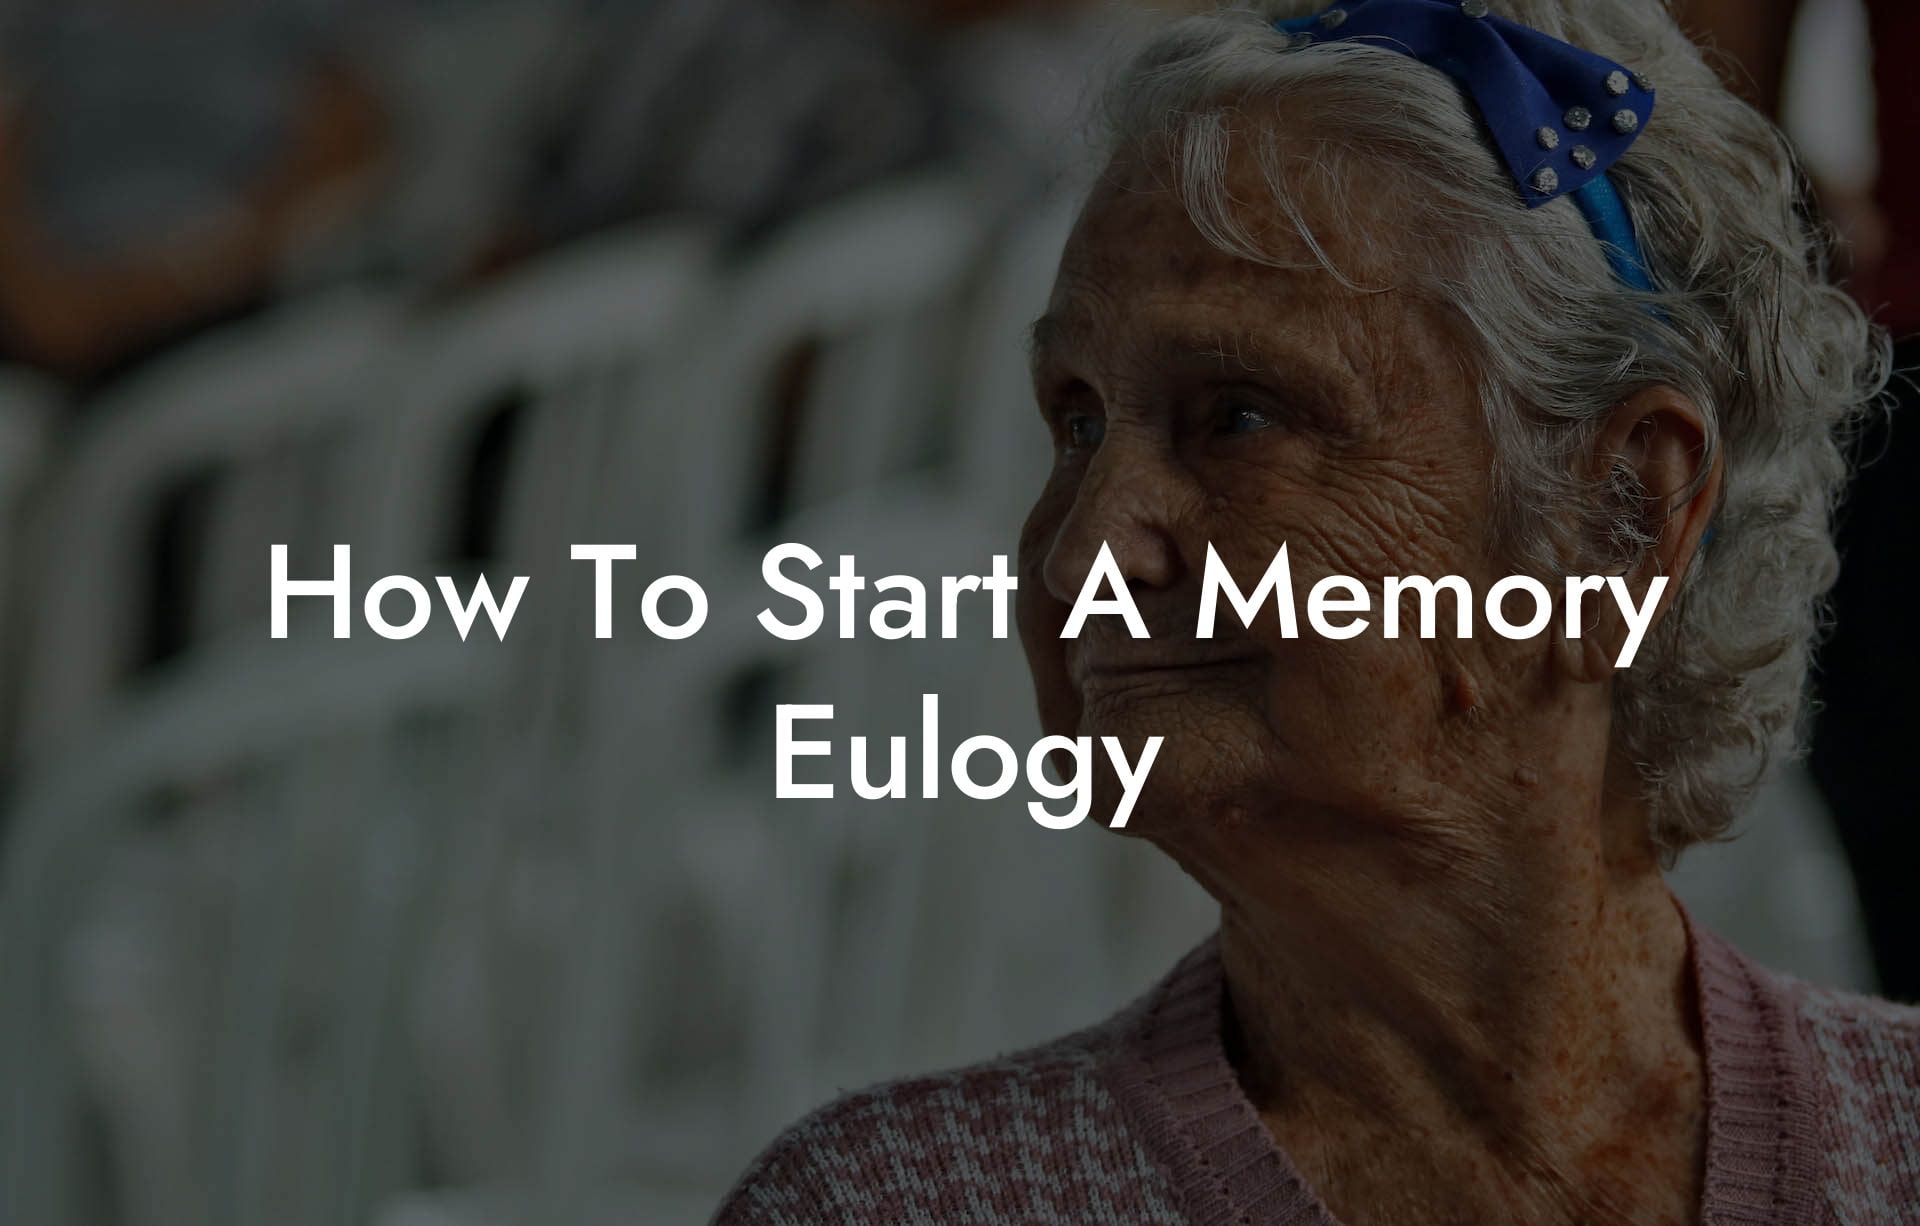 How To Start A Memory Eulogy